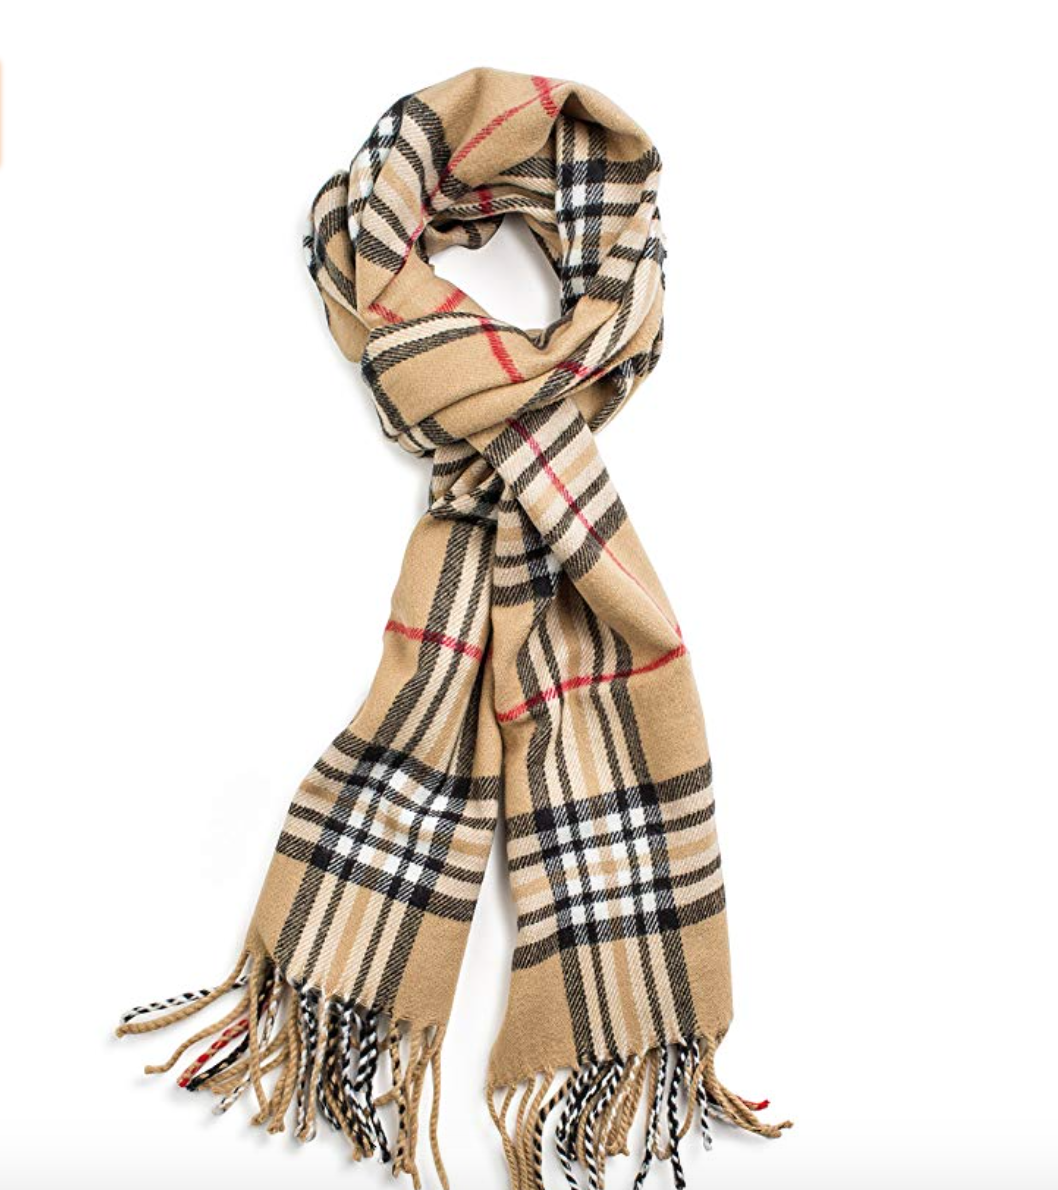 Easy to wear Burberry inspired scarf. Perfect fall and winter fashion.